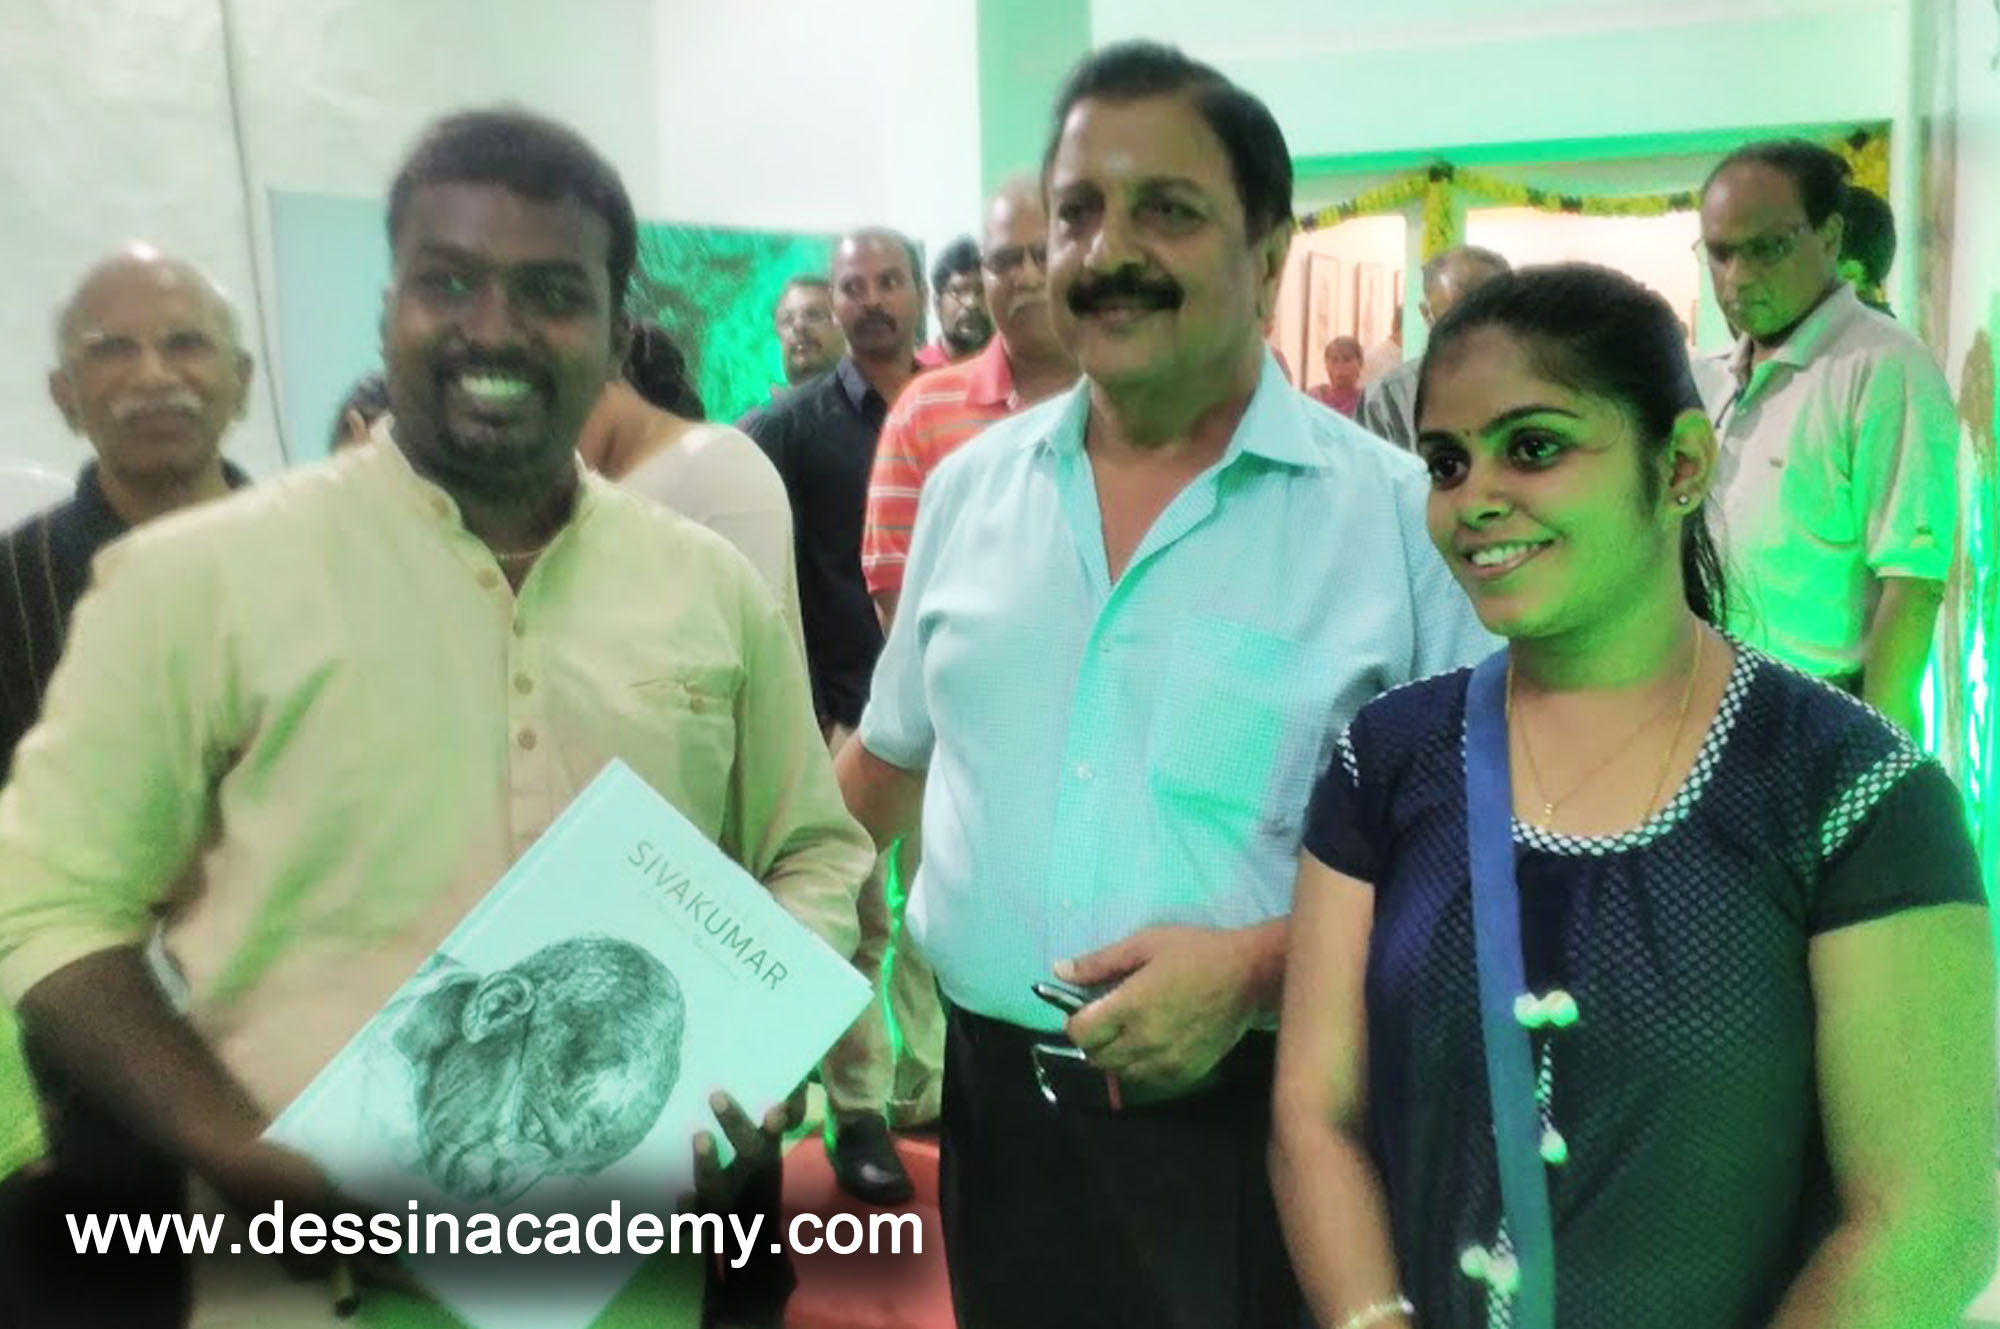 Dessin School of arts Event Gallery 4, Painting Institute in ThirumullaivoyalSai Ram Academy